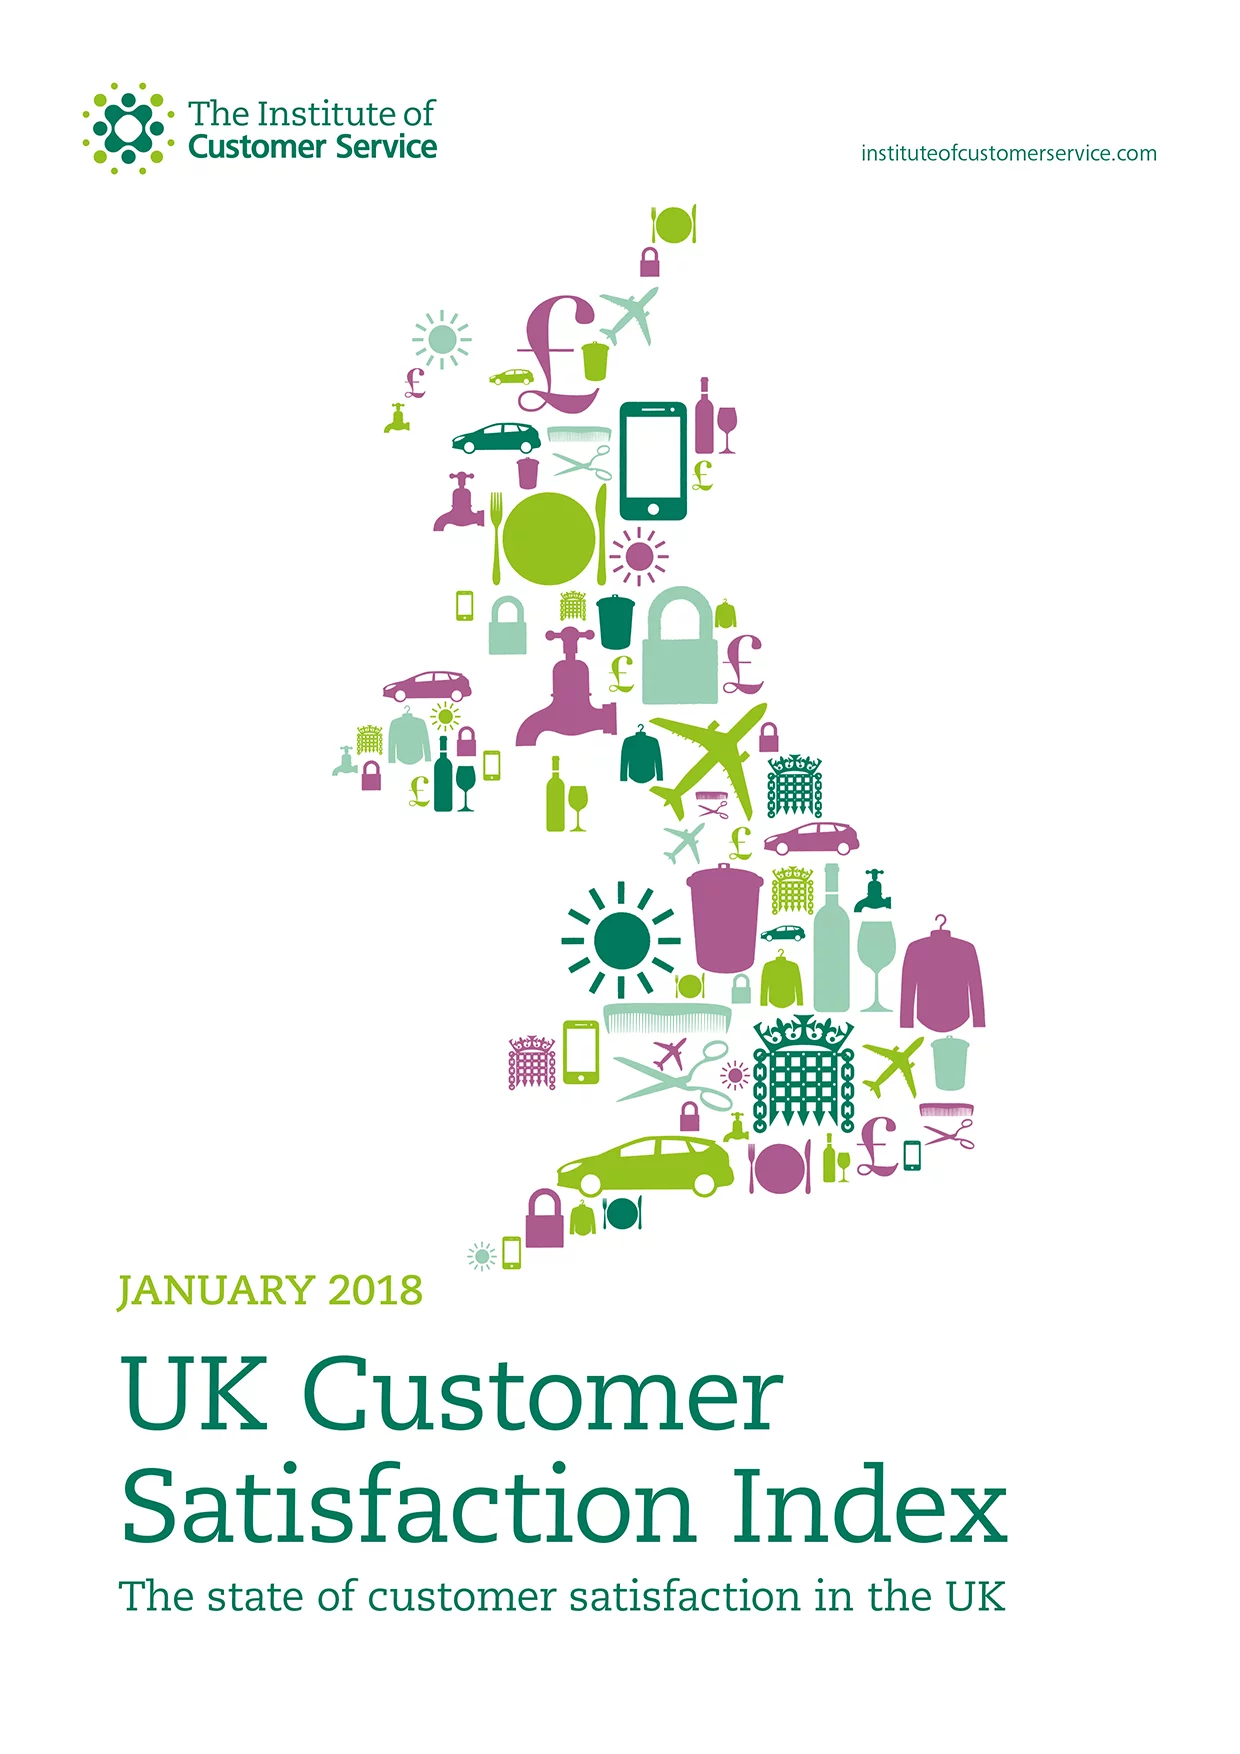 UKCSI: The state of customer satisfaction in the UK – January 2018